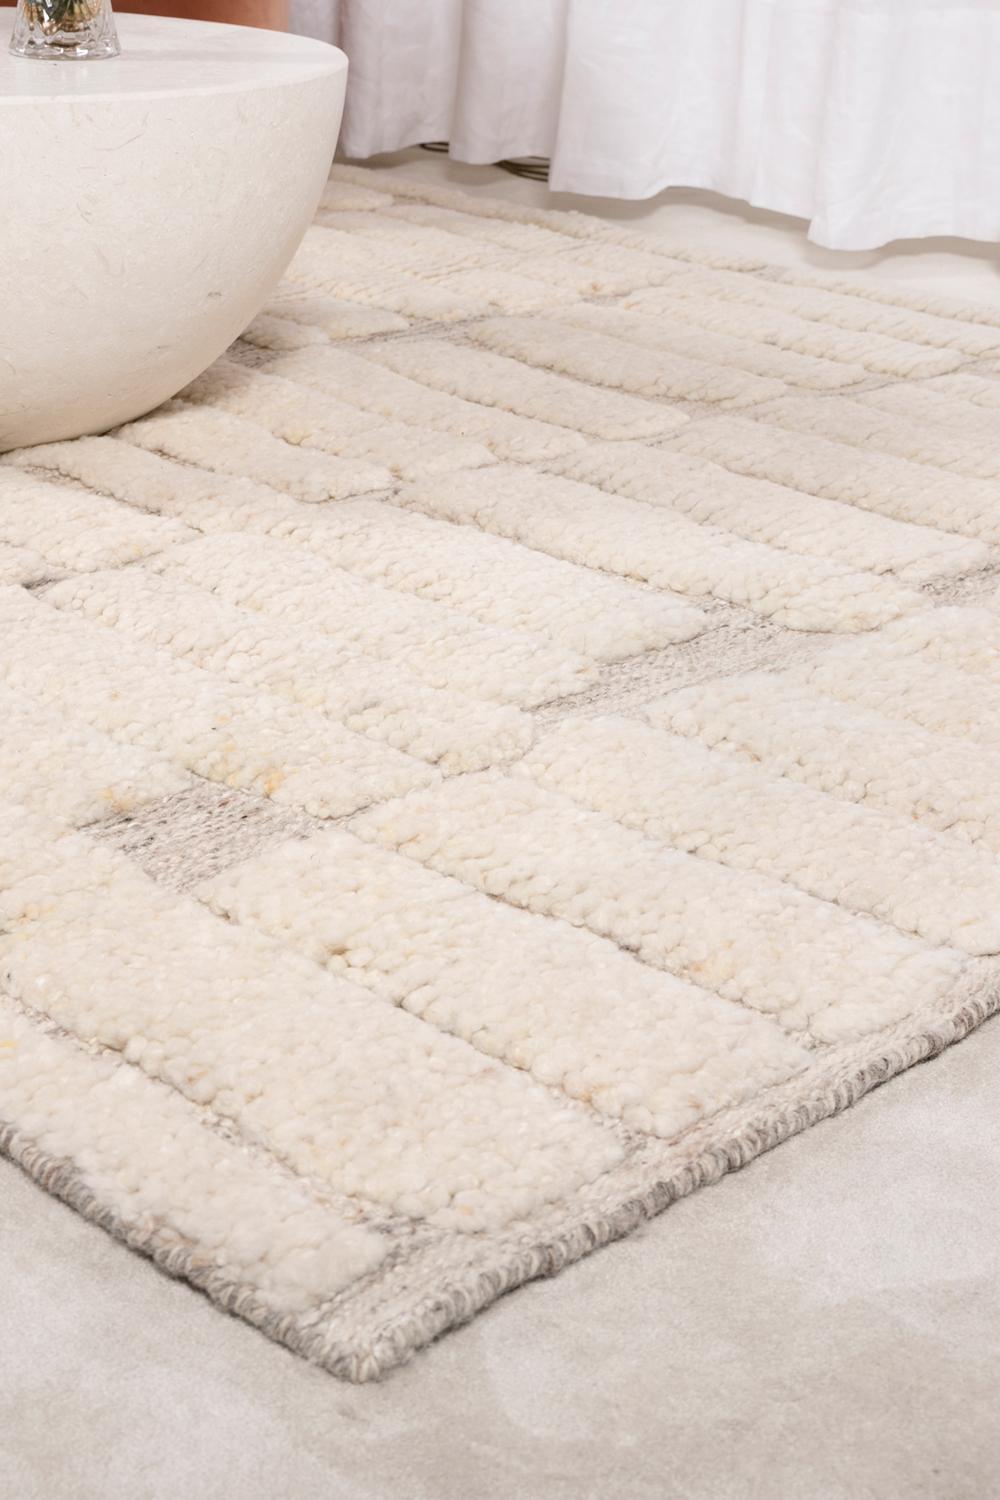 Modern Handknotted 100% Wool Rug High Pile Textures White&Greige Nzuri For Sale 12